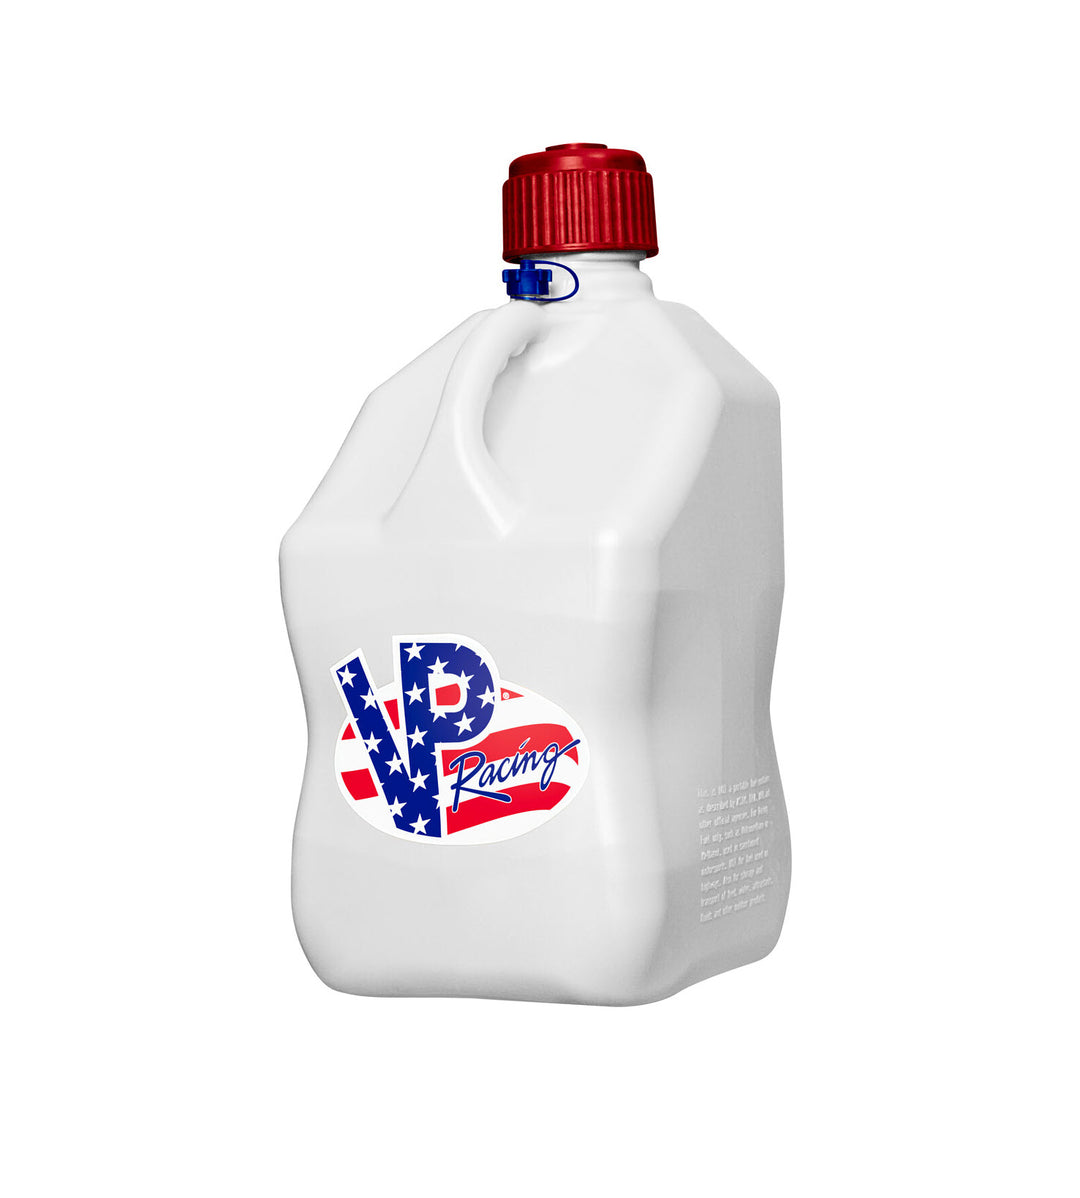 VP Racing 5.5-Gallon Motorsport Container - White Jug, Red Cap - Dirty Racing Products